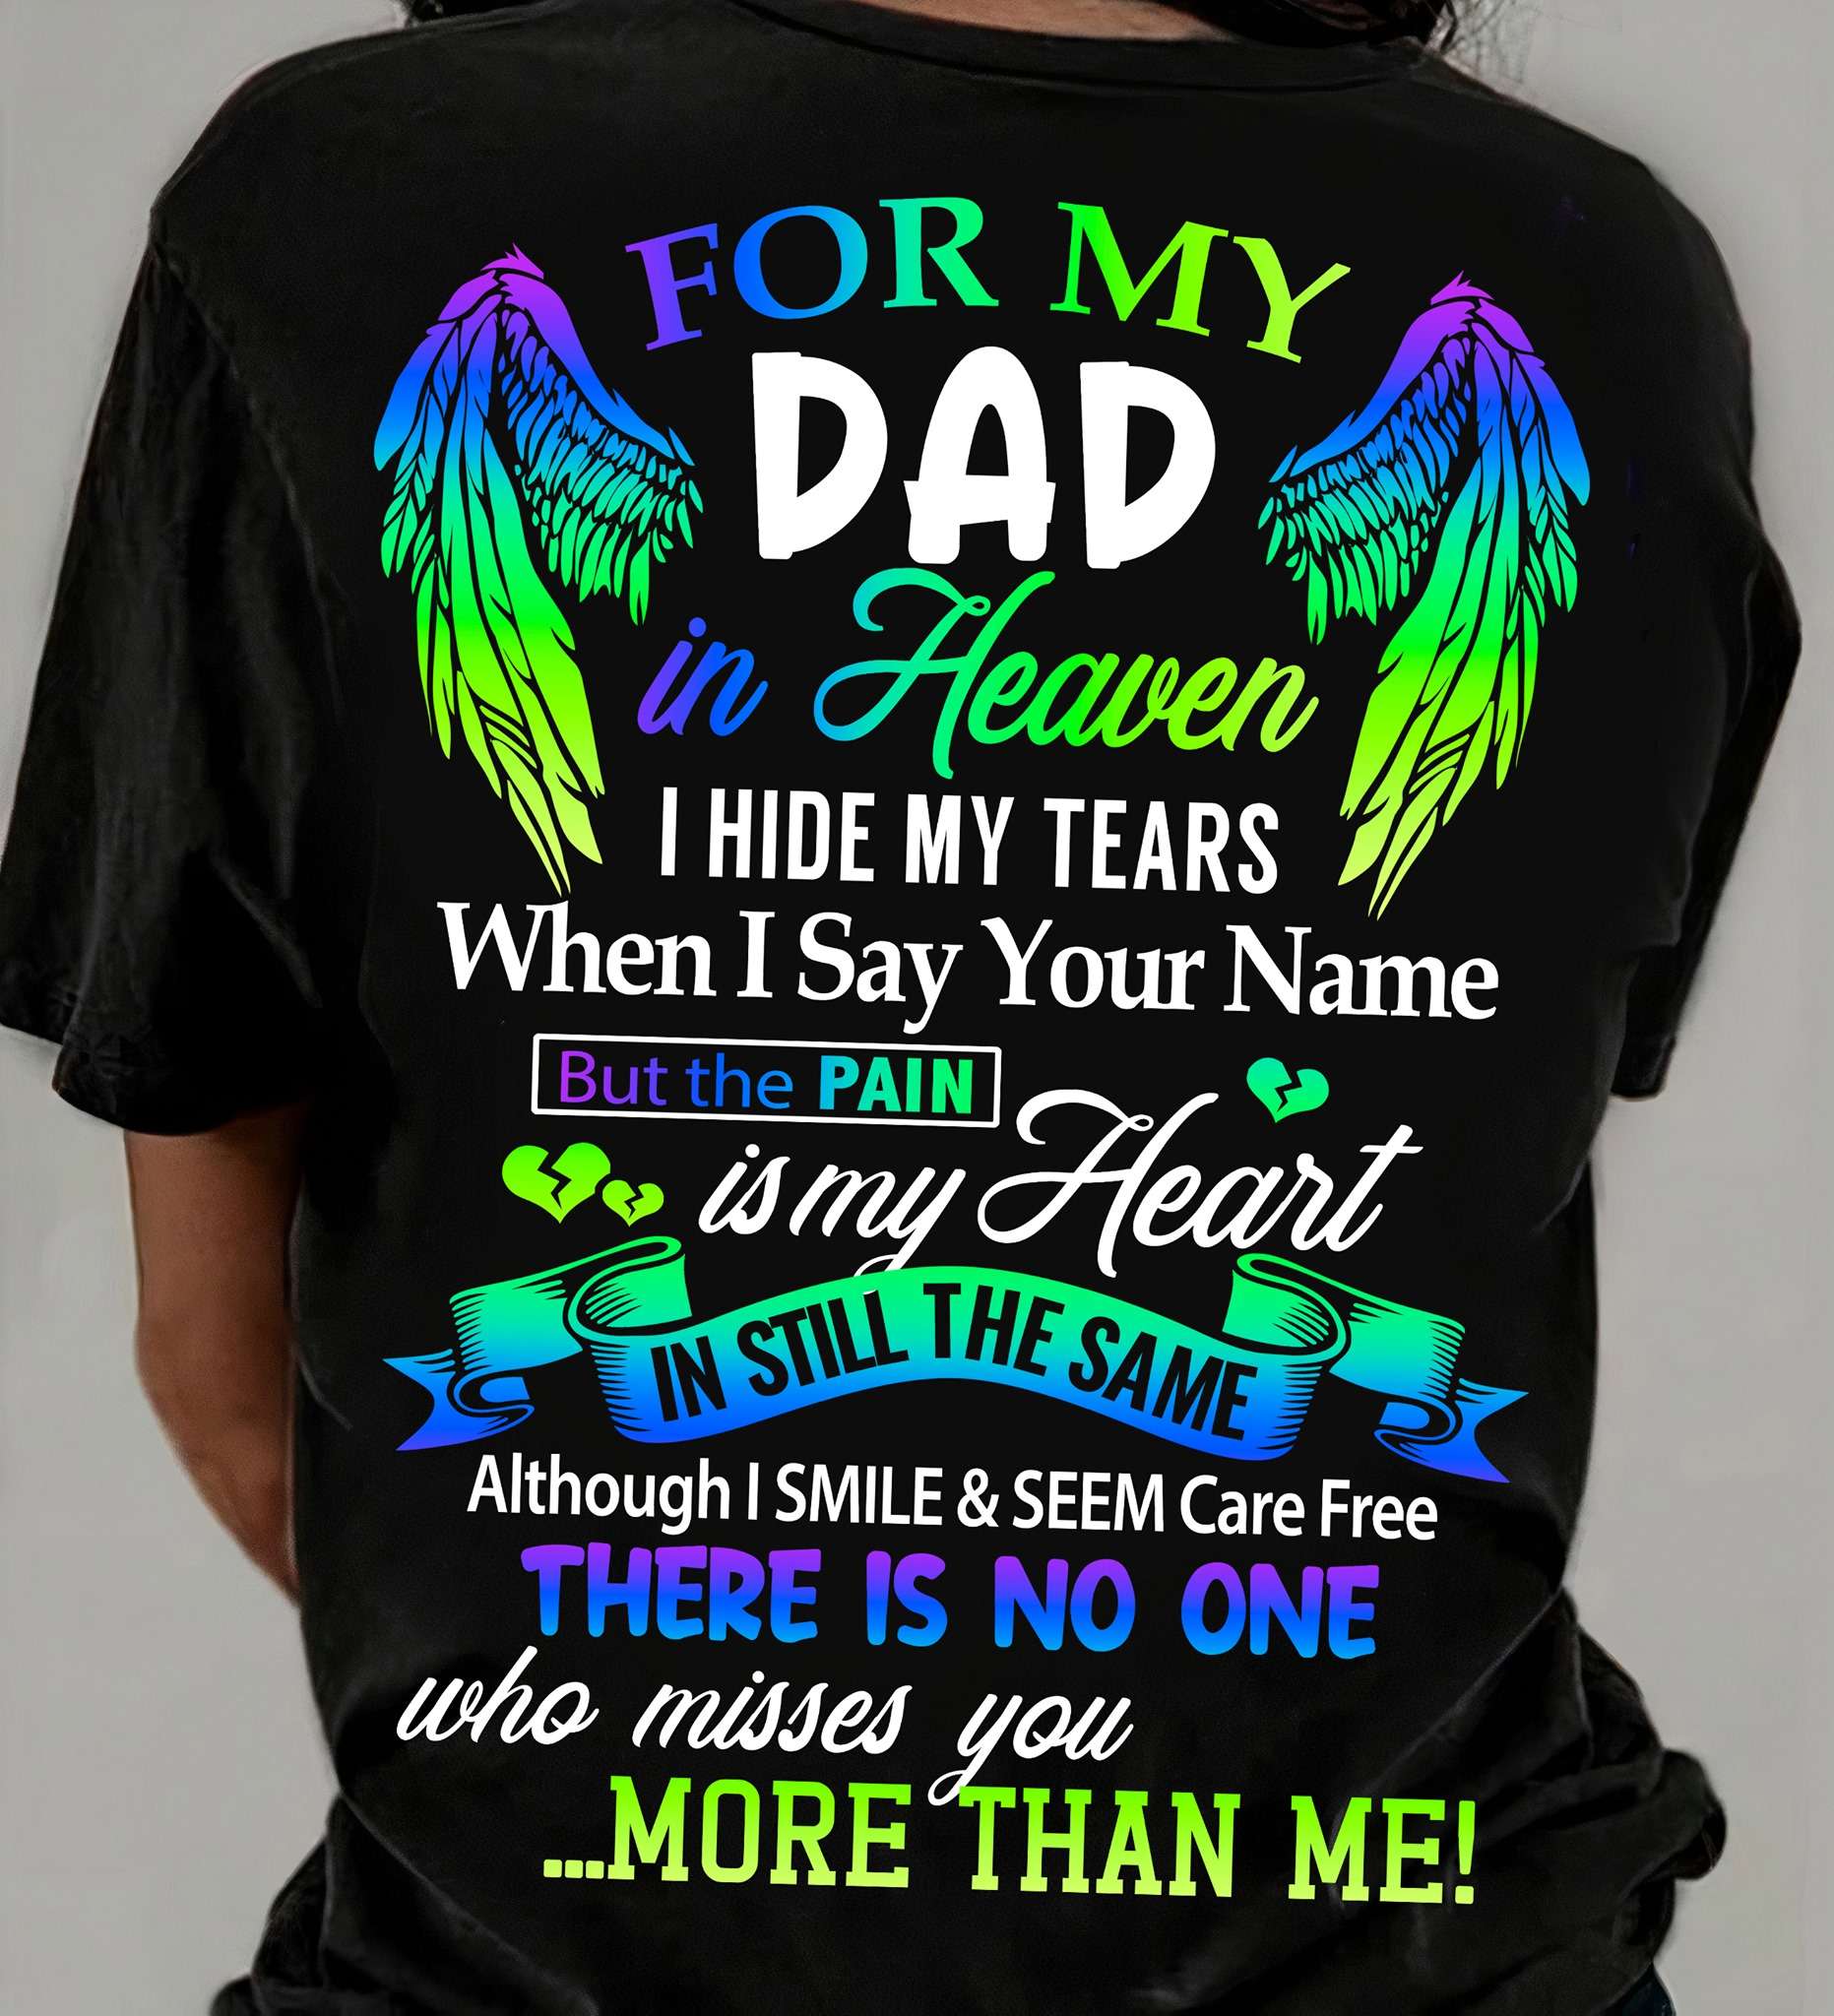 For my dad in heaven I hide my tears when I say your name - Dad with wings, father in heaven